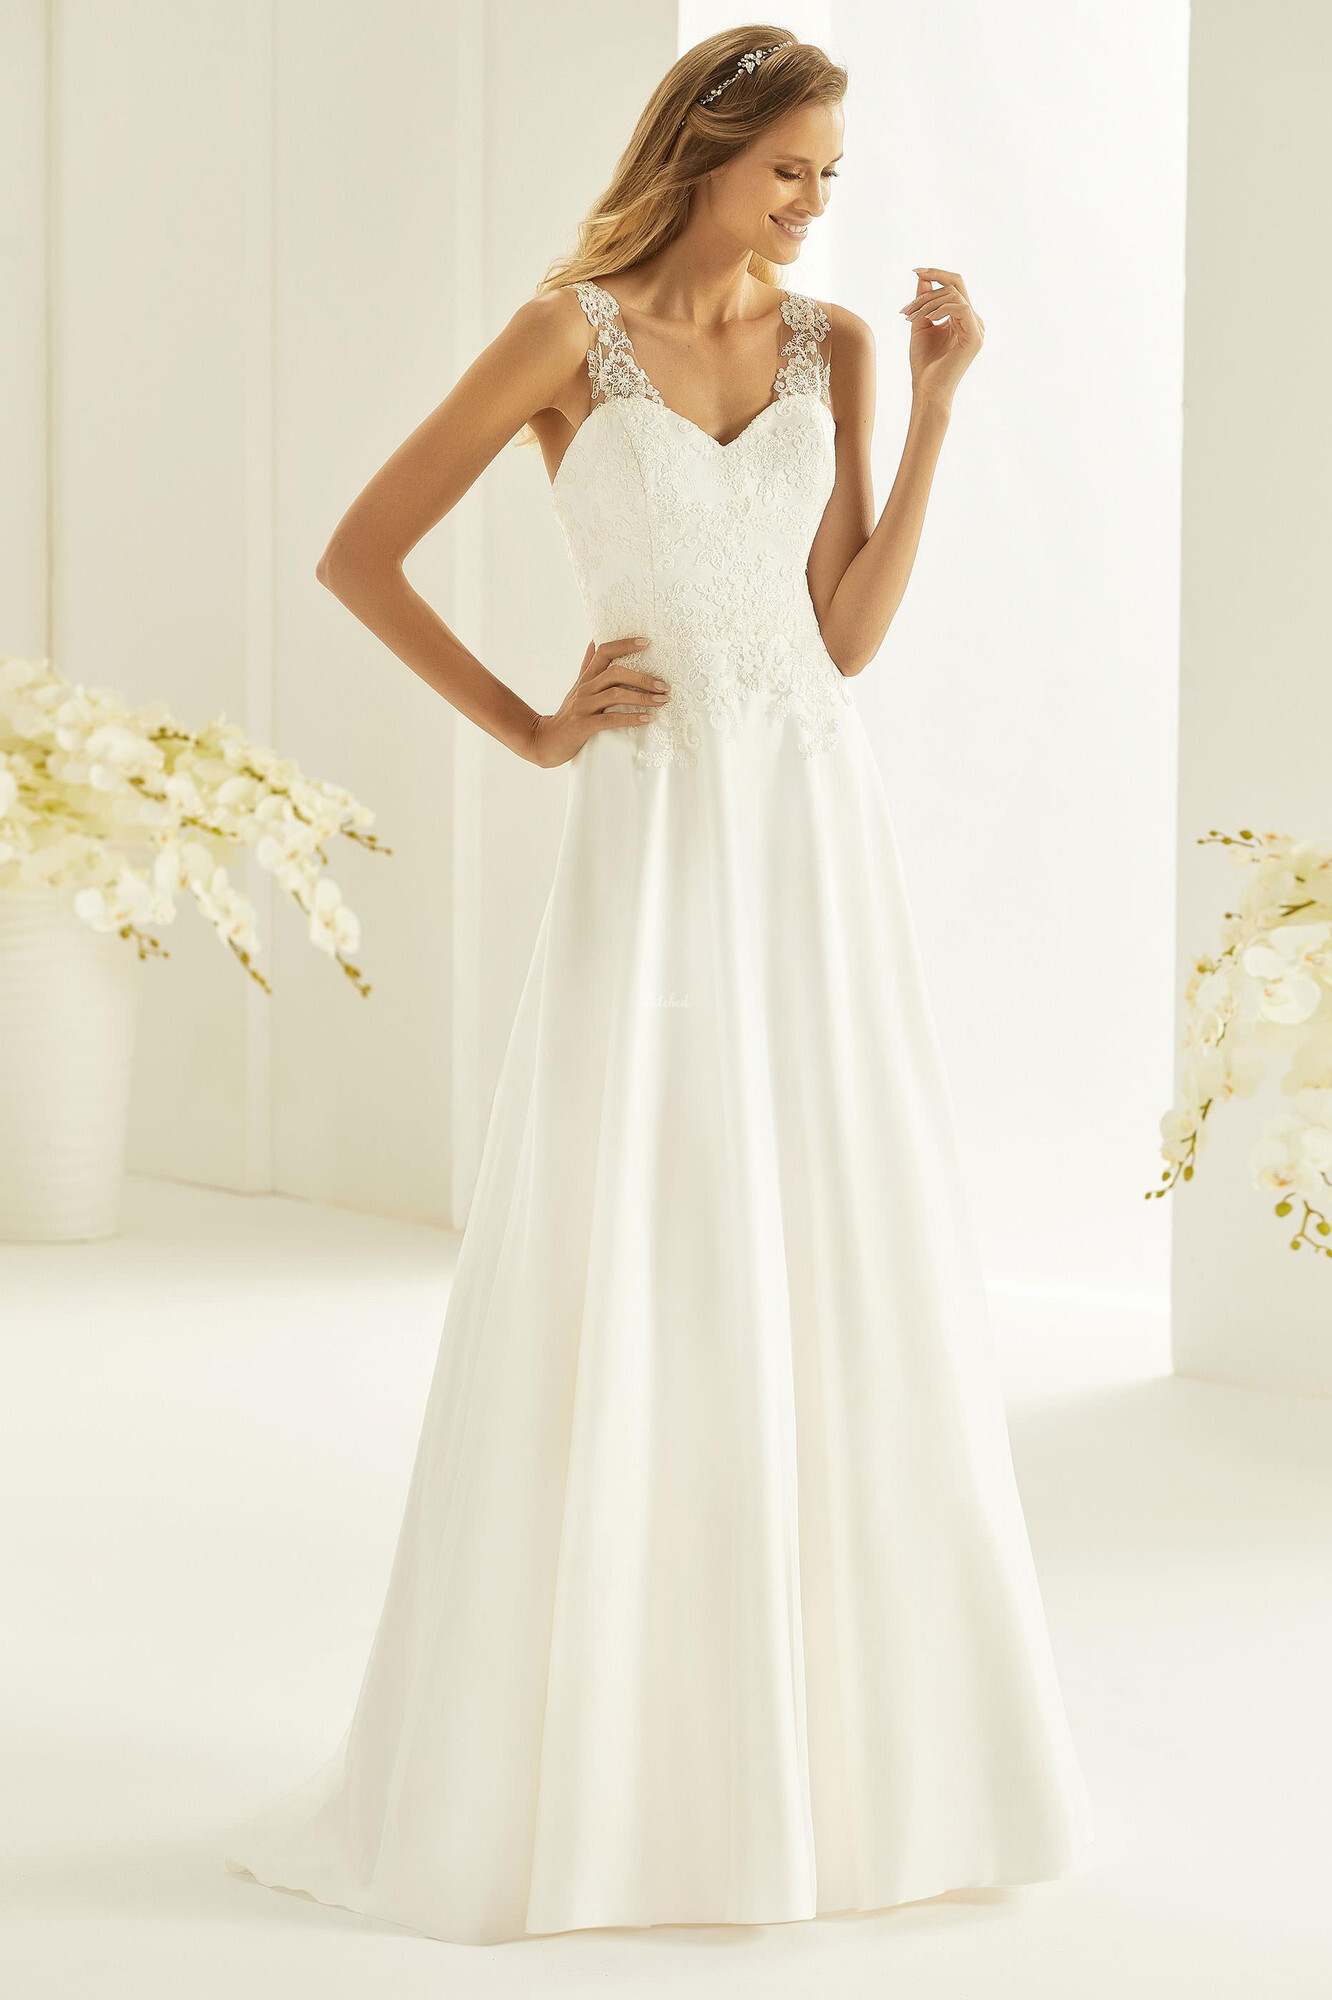 Fiona Wedding Dress from Bianco Evento - hitched.co.uk